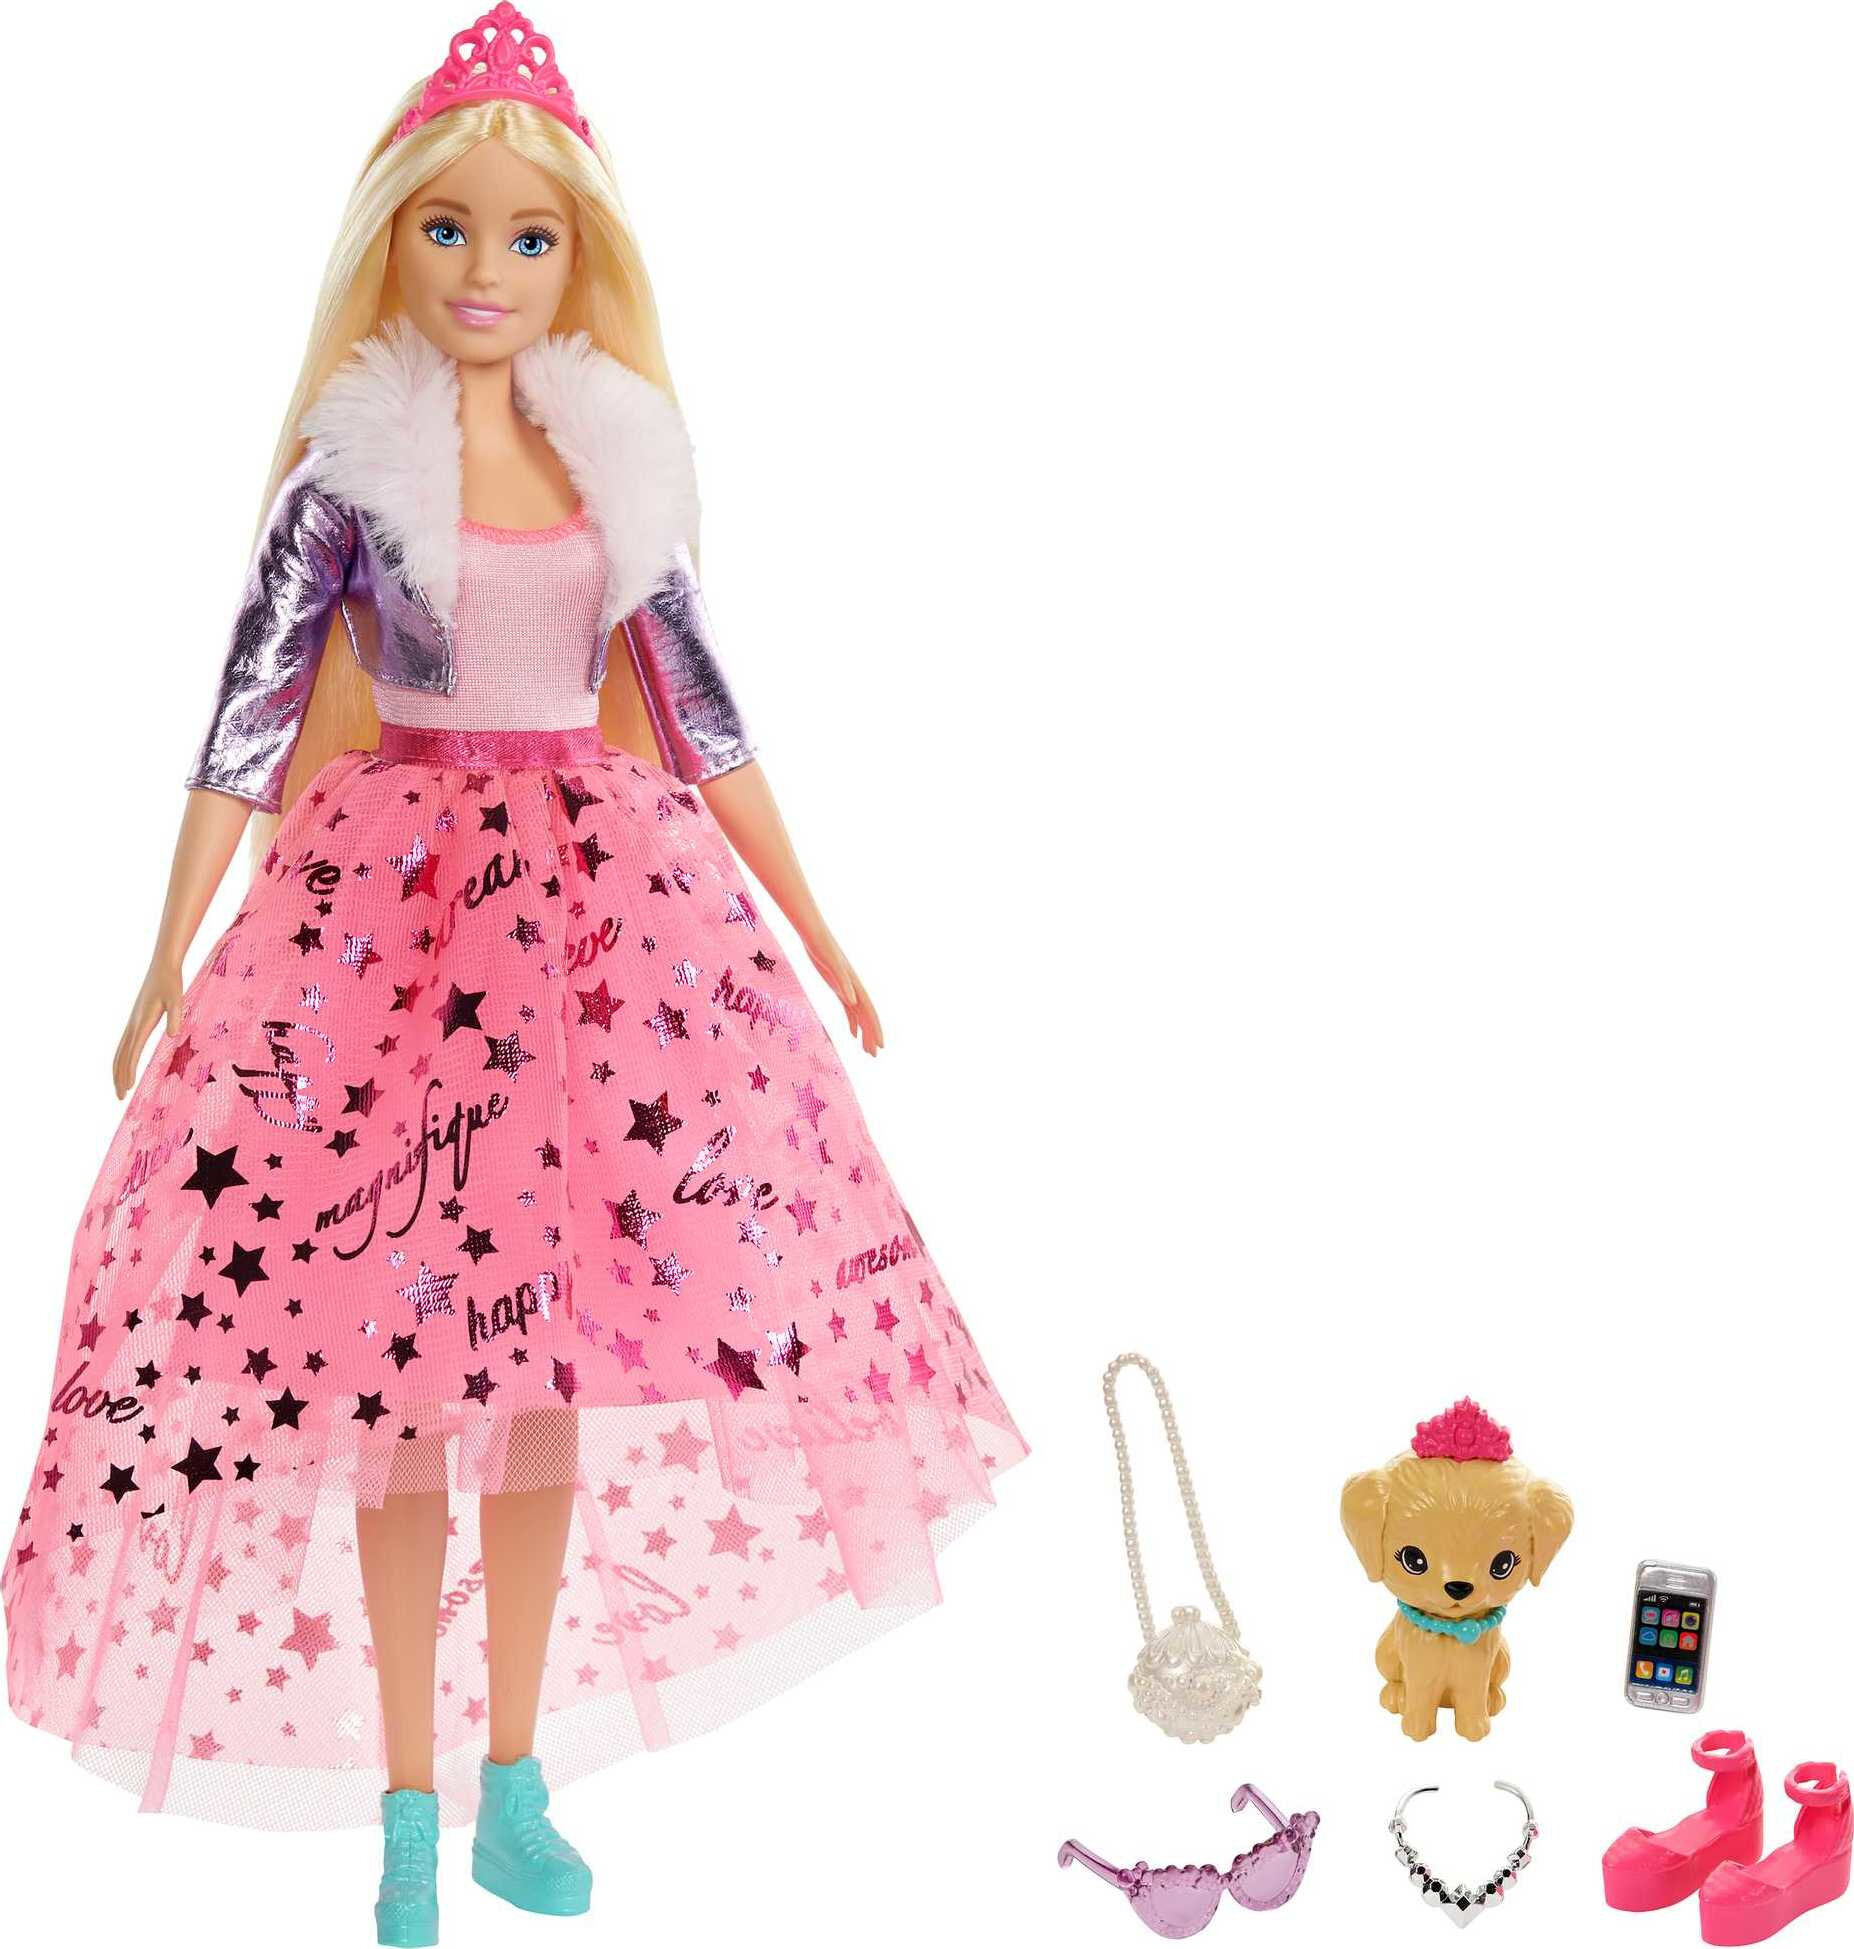 Barbie Dreamtopia Doll & Accessories, Blonde Doll with Star Skirt, Pet Puppy & Fashion Accessories, 3 to 7 Years - image 1 of 7